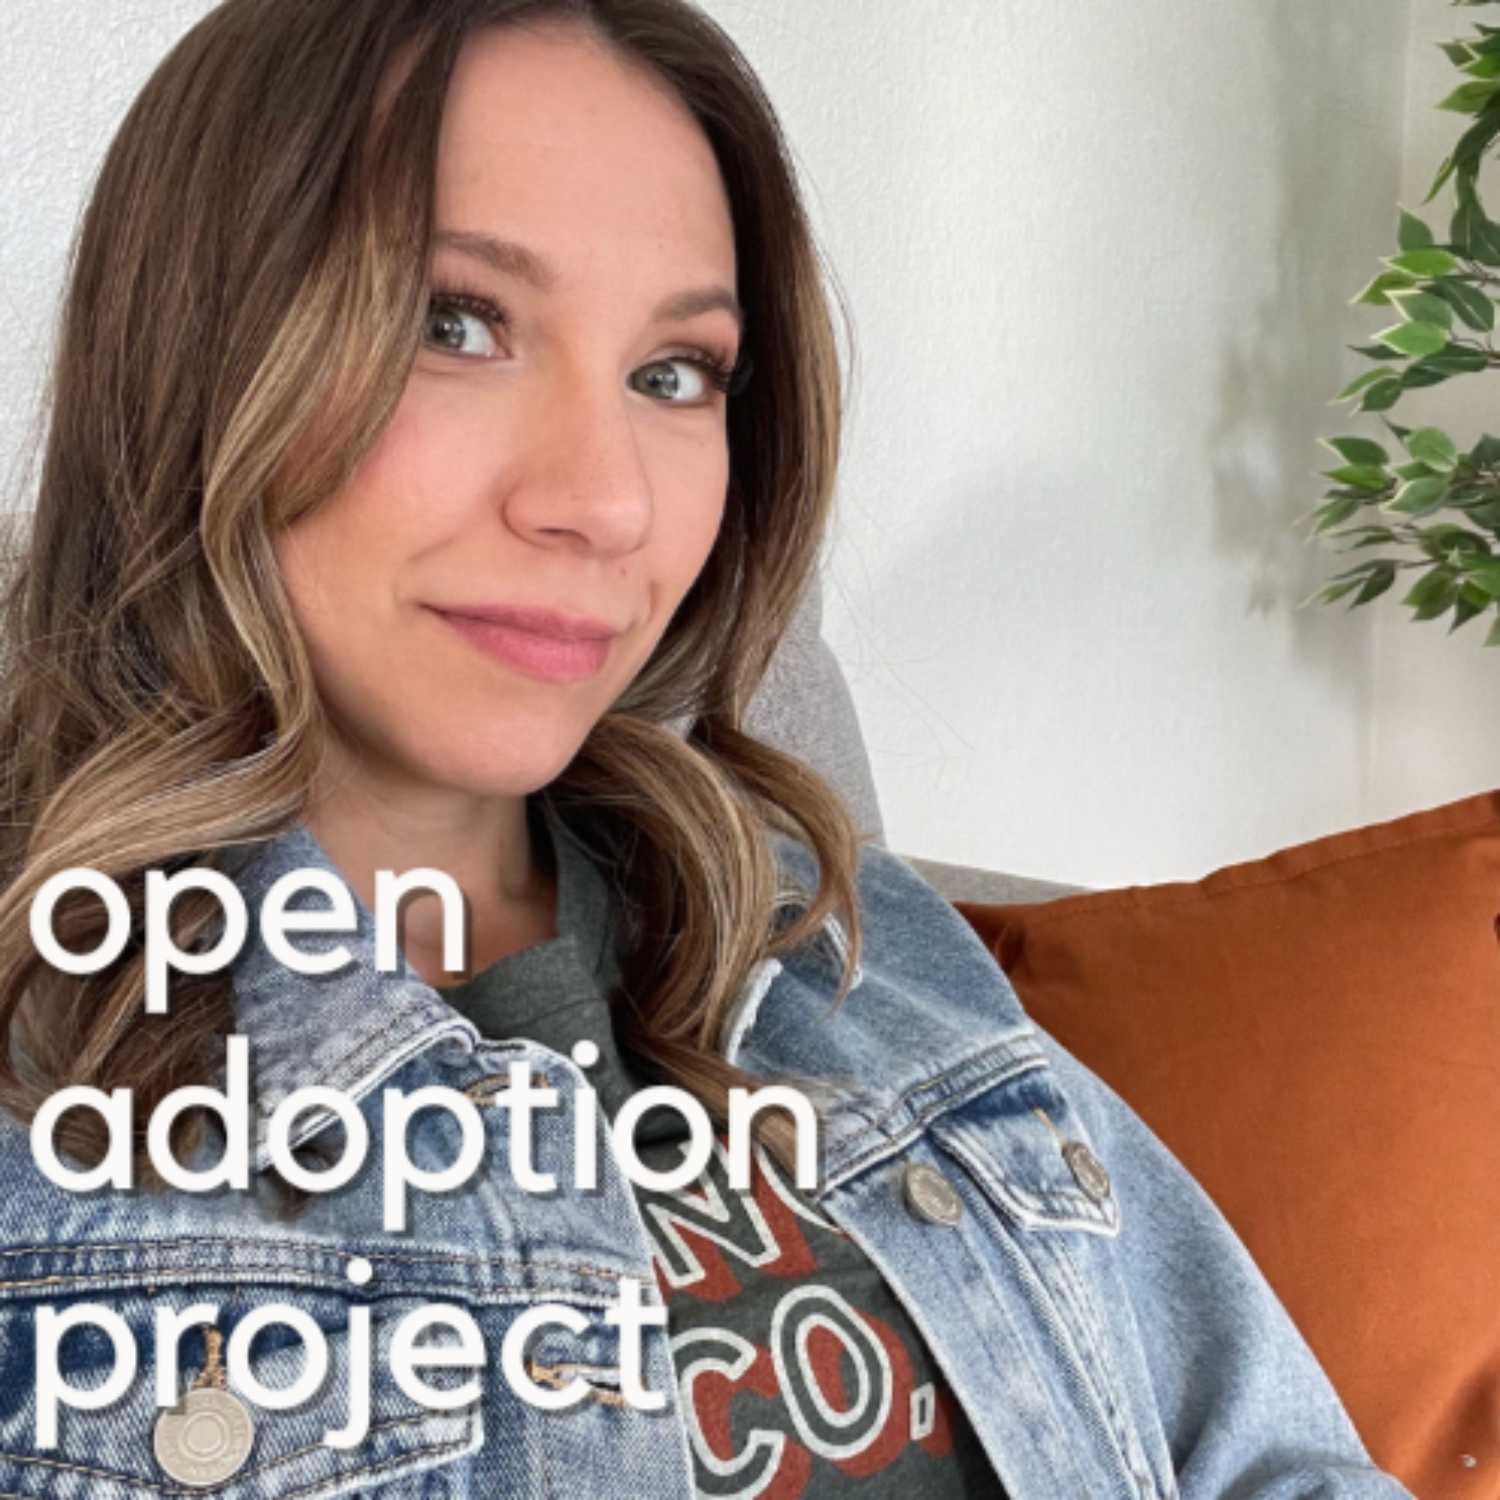 “I Don’t Think I Would Have Chosen Adoption Without Openness” with Leah Outten